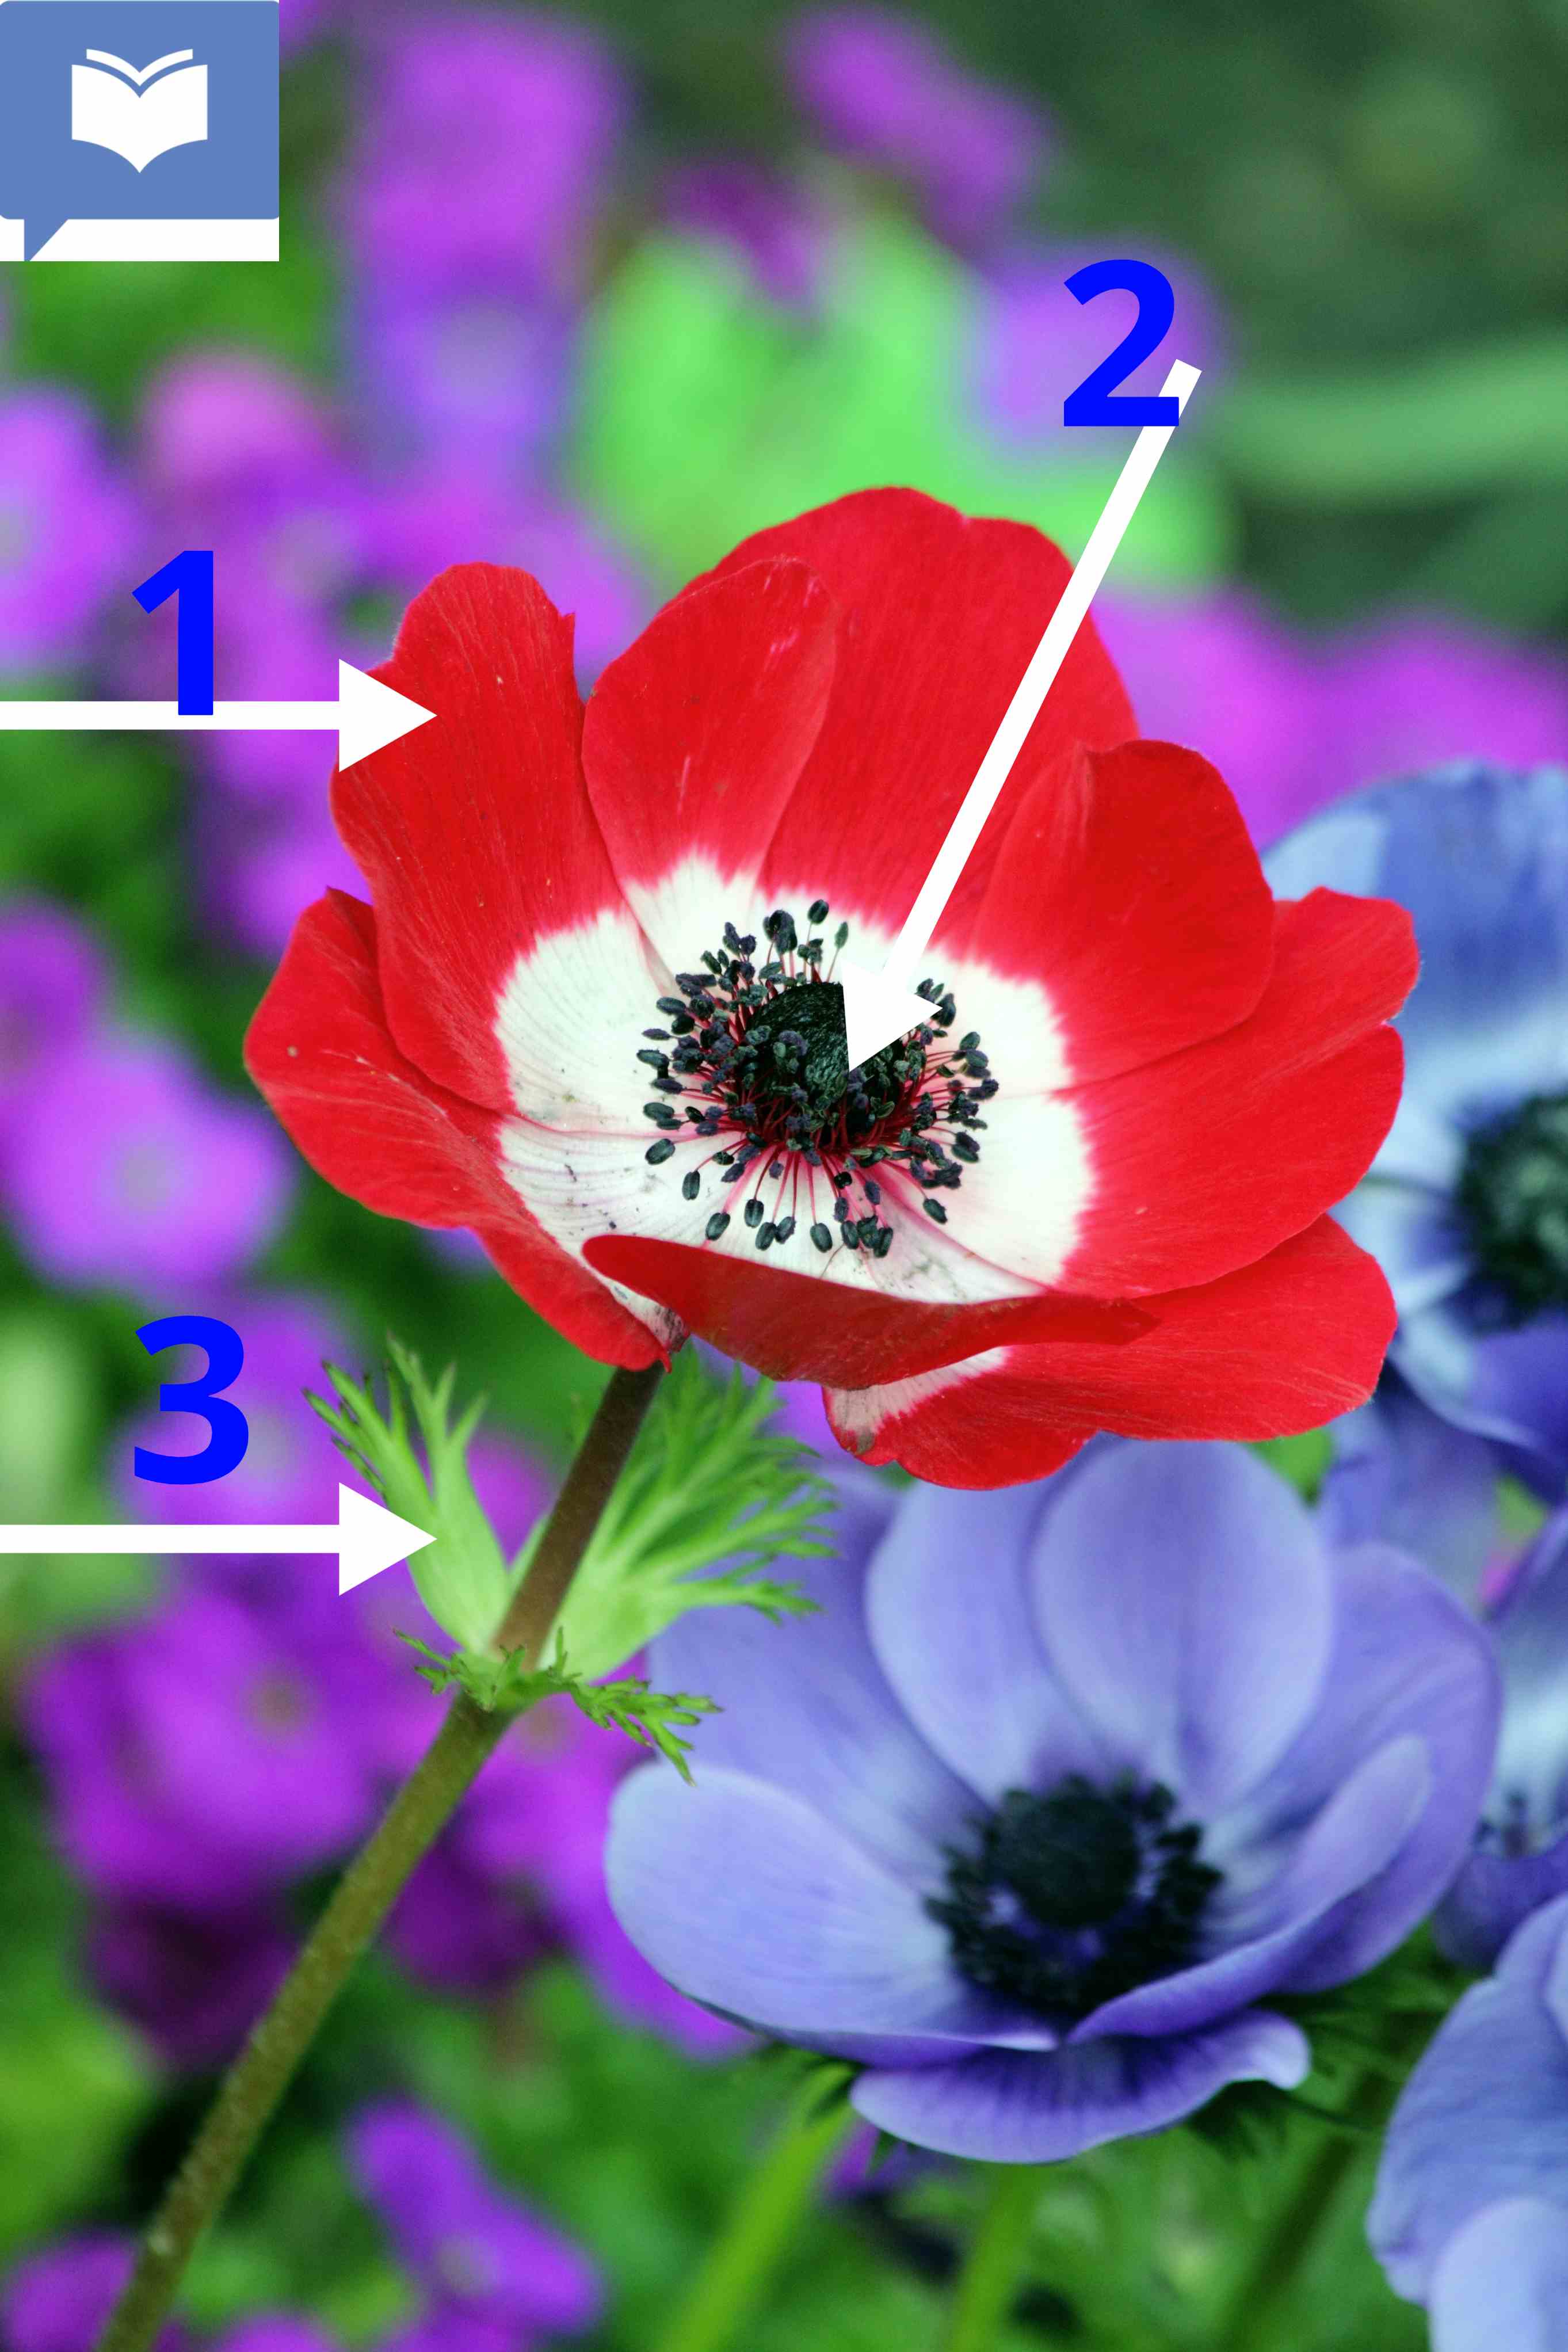 <p>Below is a poppy, what does the red part labelled 1 represent during the remembrance day?</p>